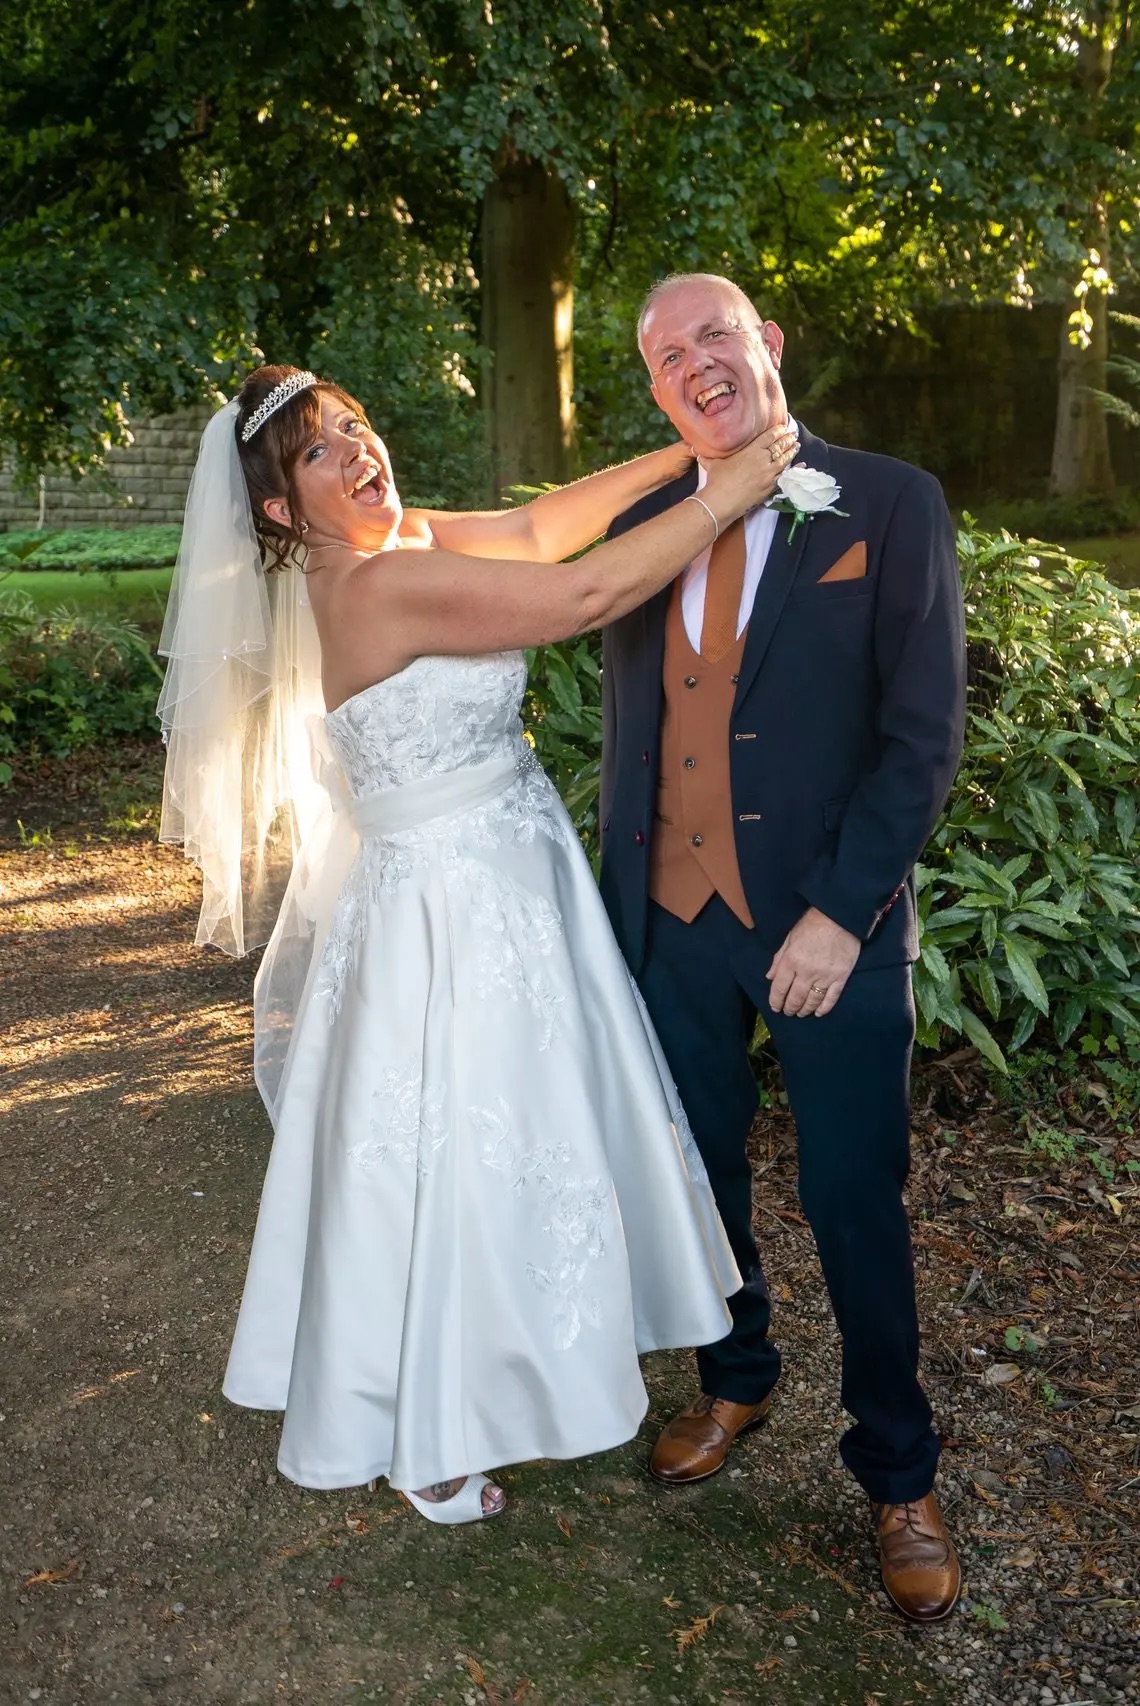 Nicola & Mark having fun and laughs in Carr Bank Park grounds at Carr Bank Wedding Venue Mansfield Nottinghamshire 